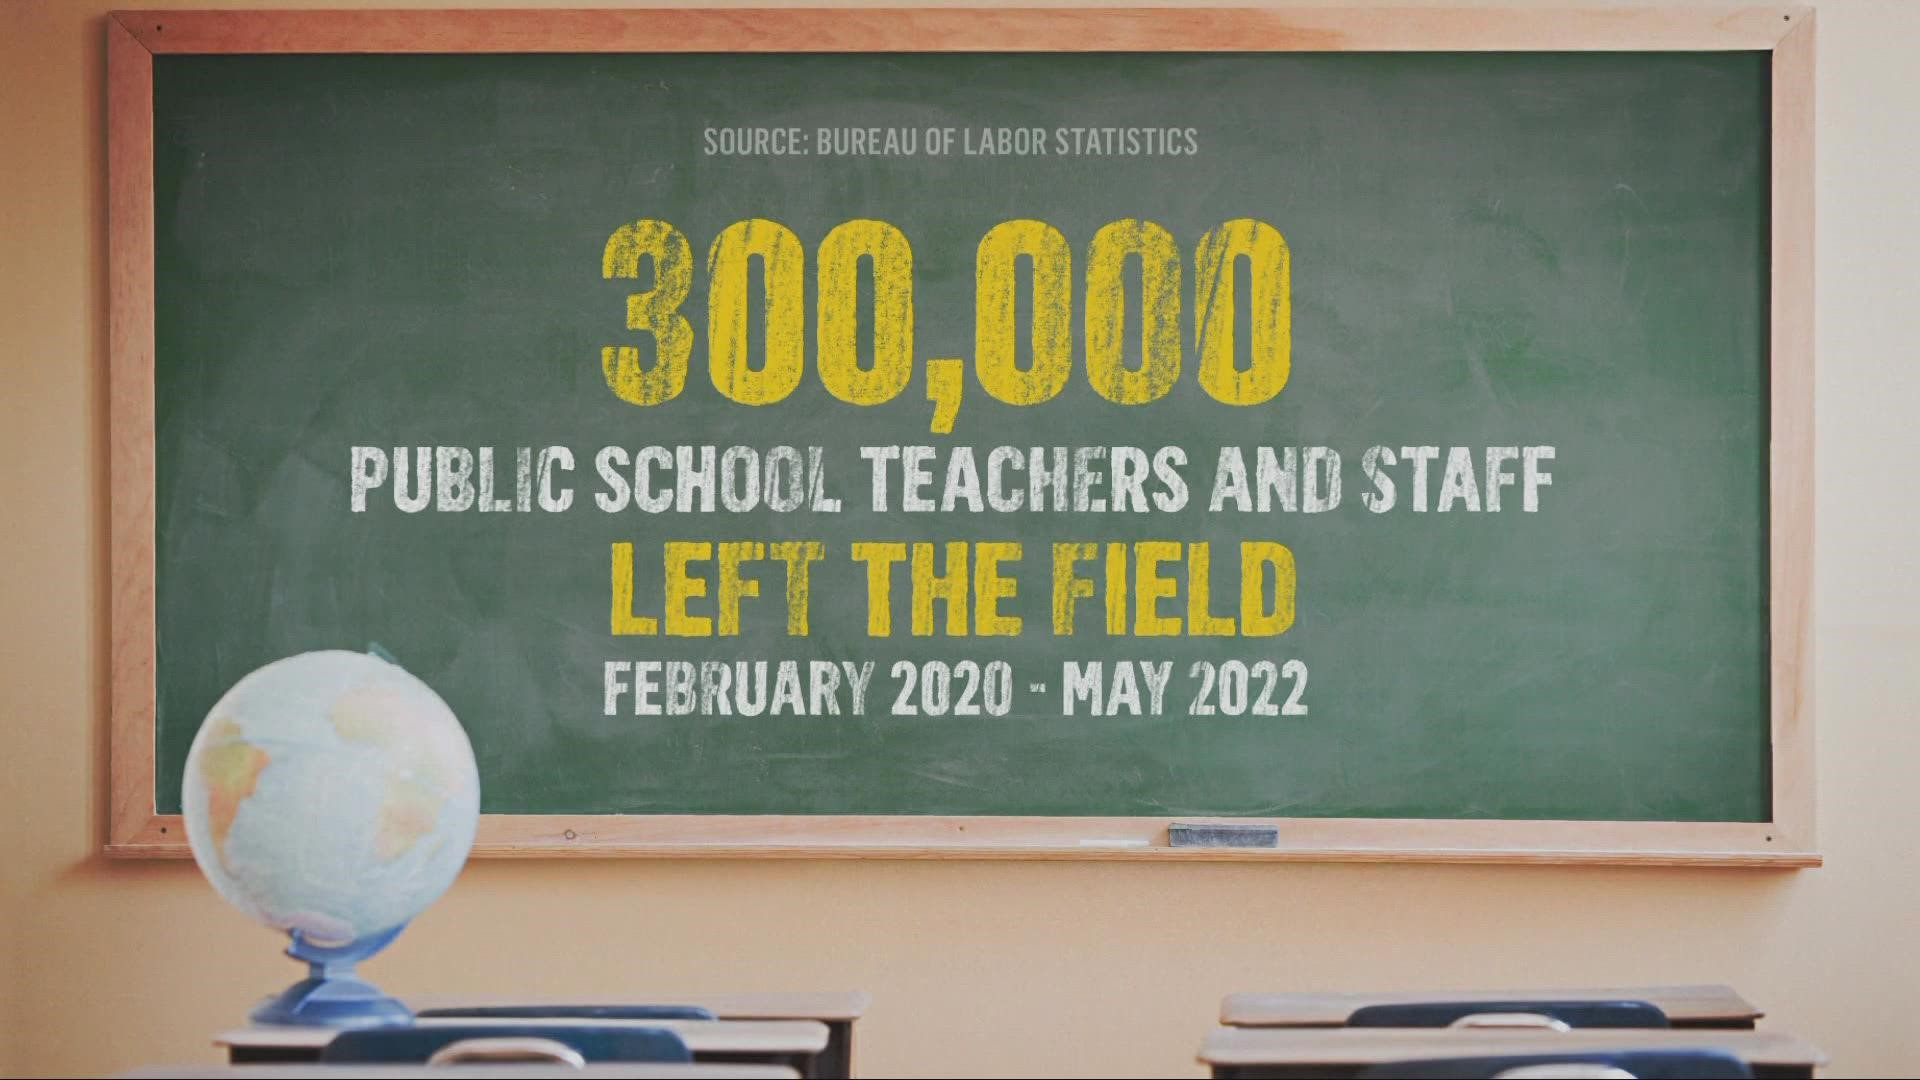 According to NBC News, 300,000 public school teachers and staff left the field between February 2020 and May 2022.